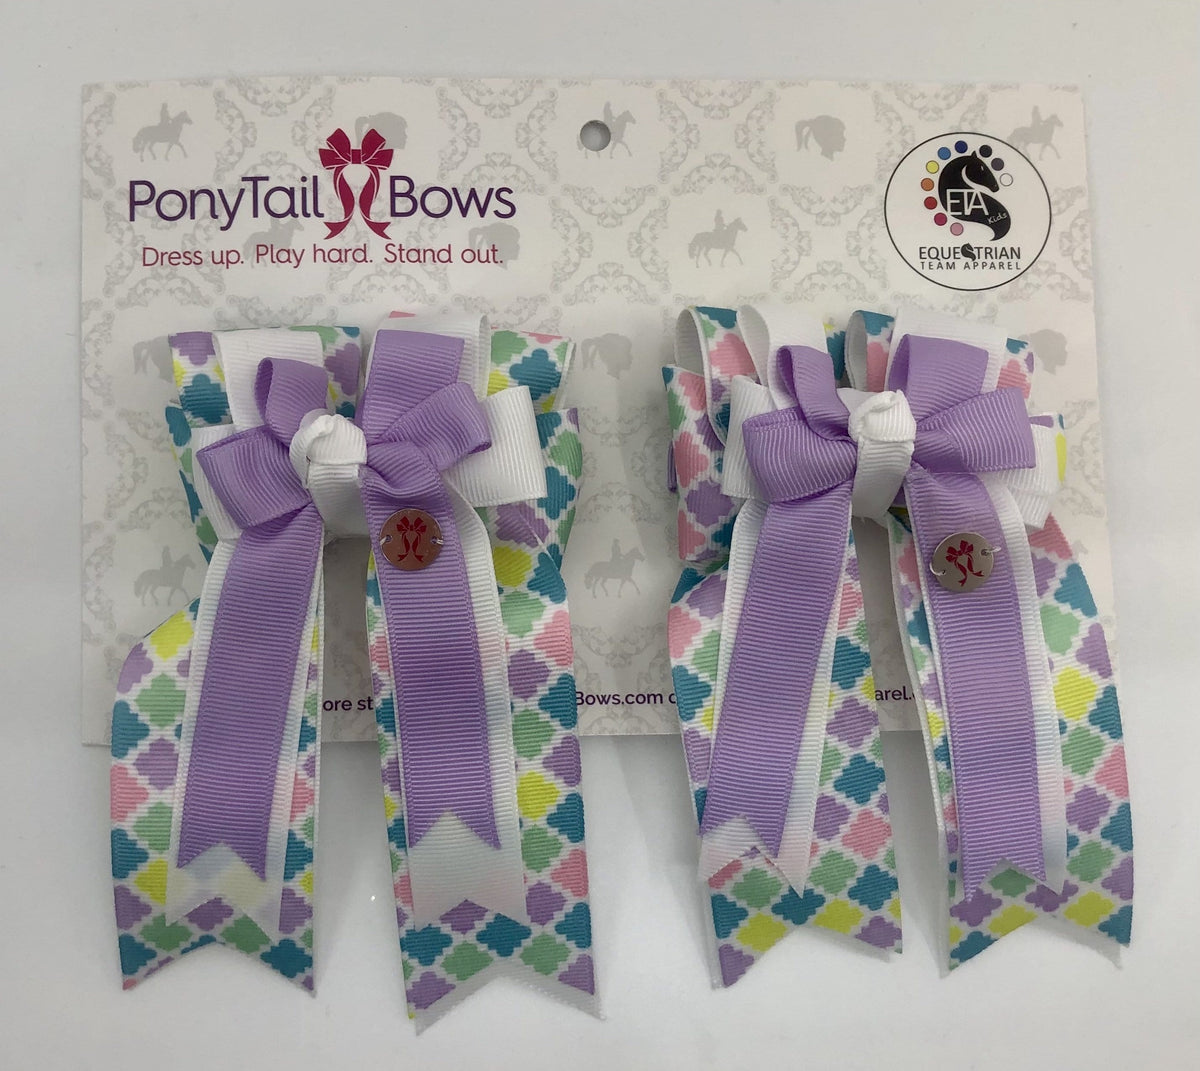 PonyTail Bows 3" Tails Pastel Lilac PonyTail Bows equestrian team apparel online tack store mobile tack store custom farm apparel custom show stable clothing equestrian lifestyle horse show clothing riding clothes PonyTail Bows | Equestrian Hair Accessories horses equestrian tack store